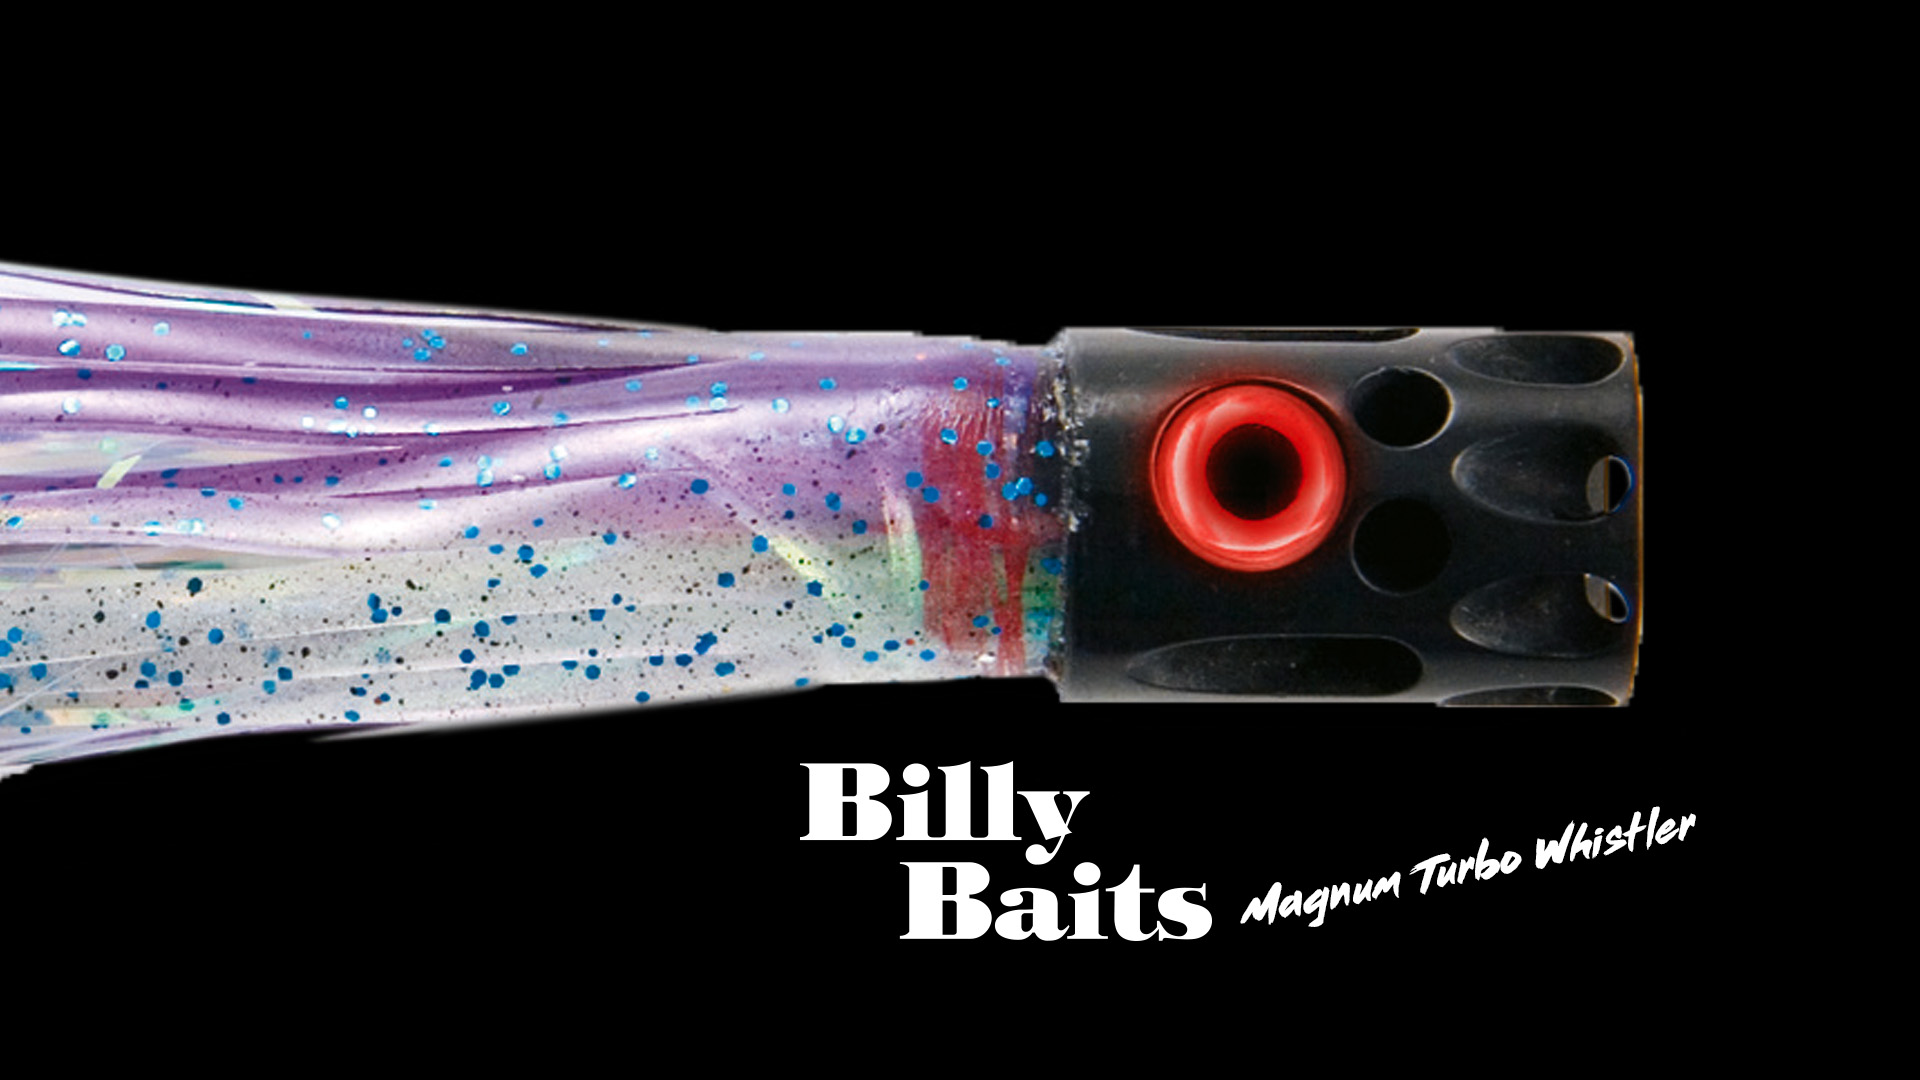 Billy Baits Magnum Turbo Whistler – Way Of Fishing